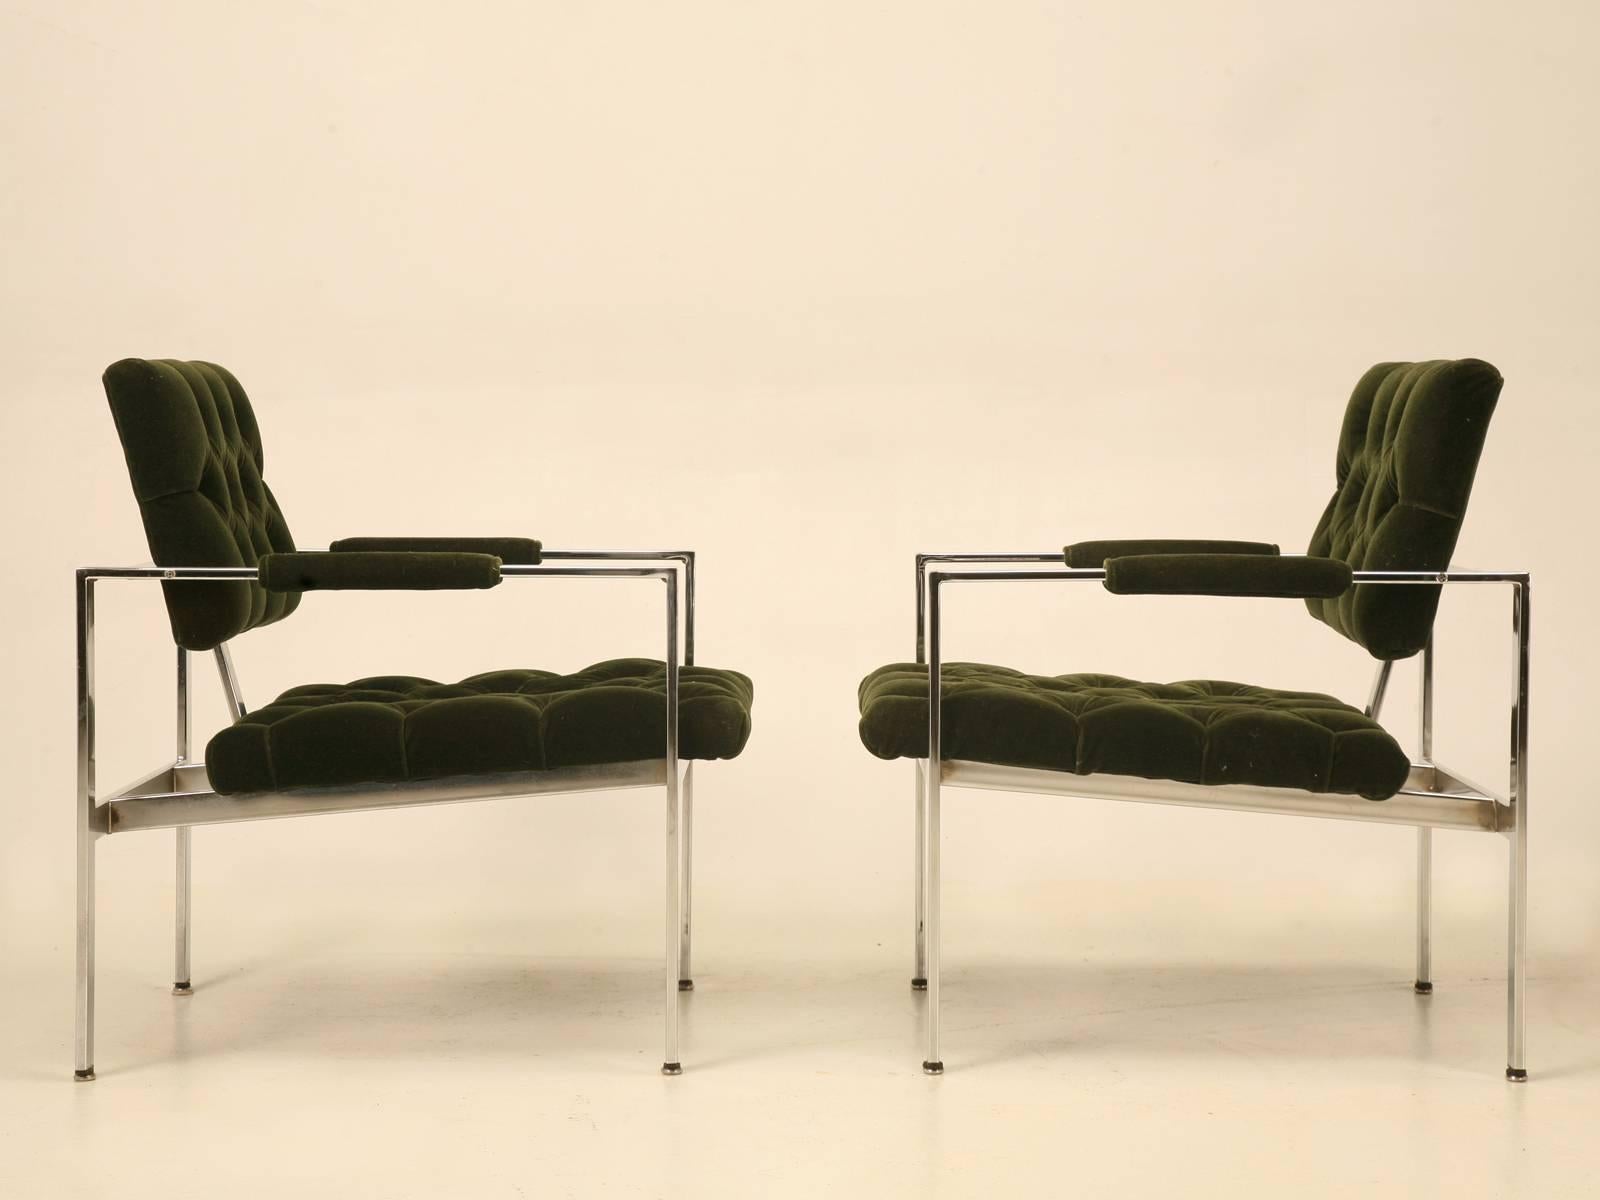 Pair of circa 1970s Lounge Chairs designed by Milo Baughman. Recently re-covered in a beautiful very dark green Mohair from Todd Hase. Extremely comfortable. Please note minor surface scratches on the chrome.